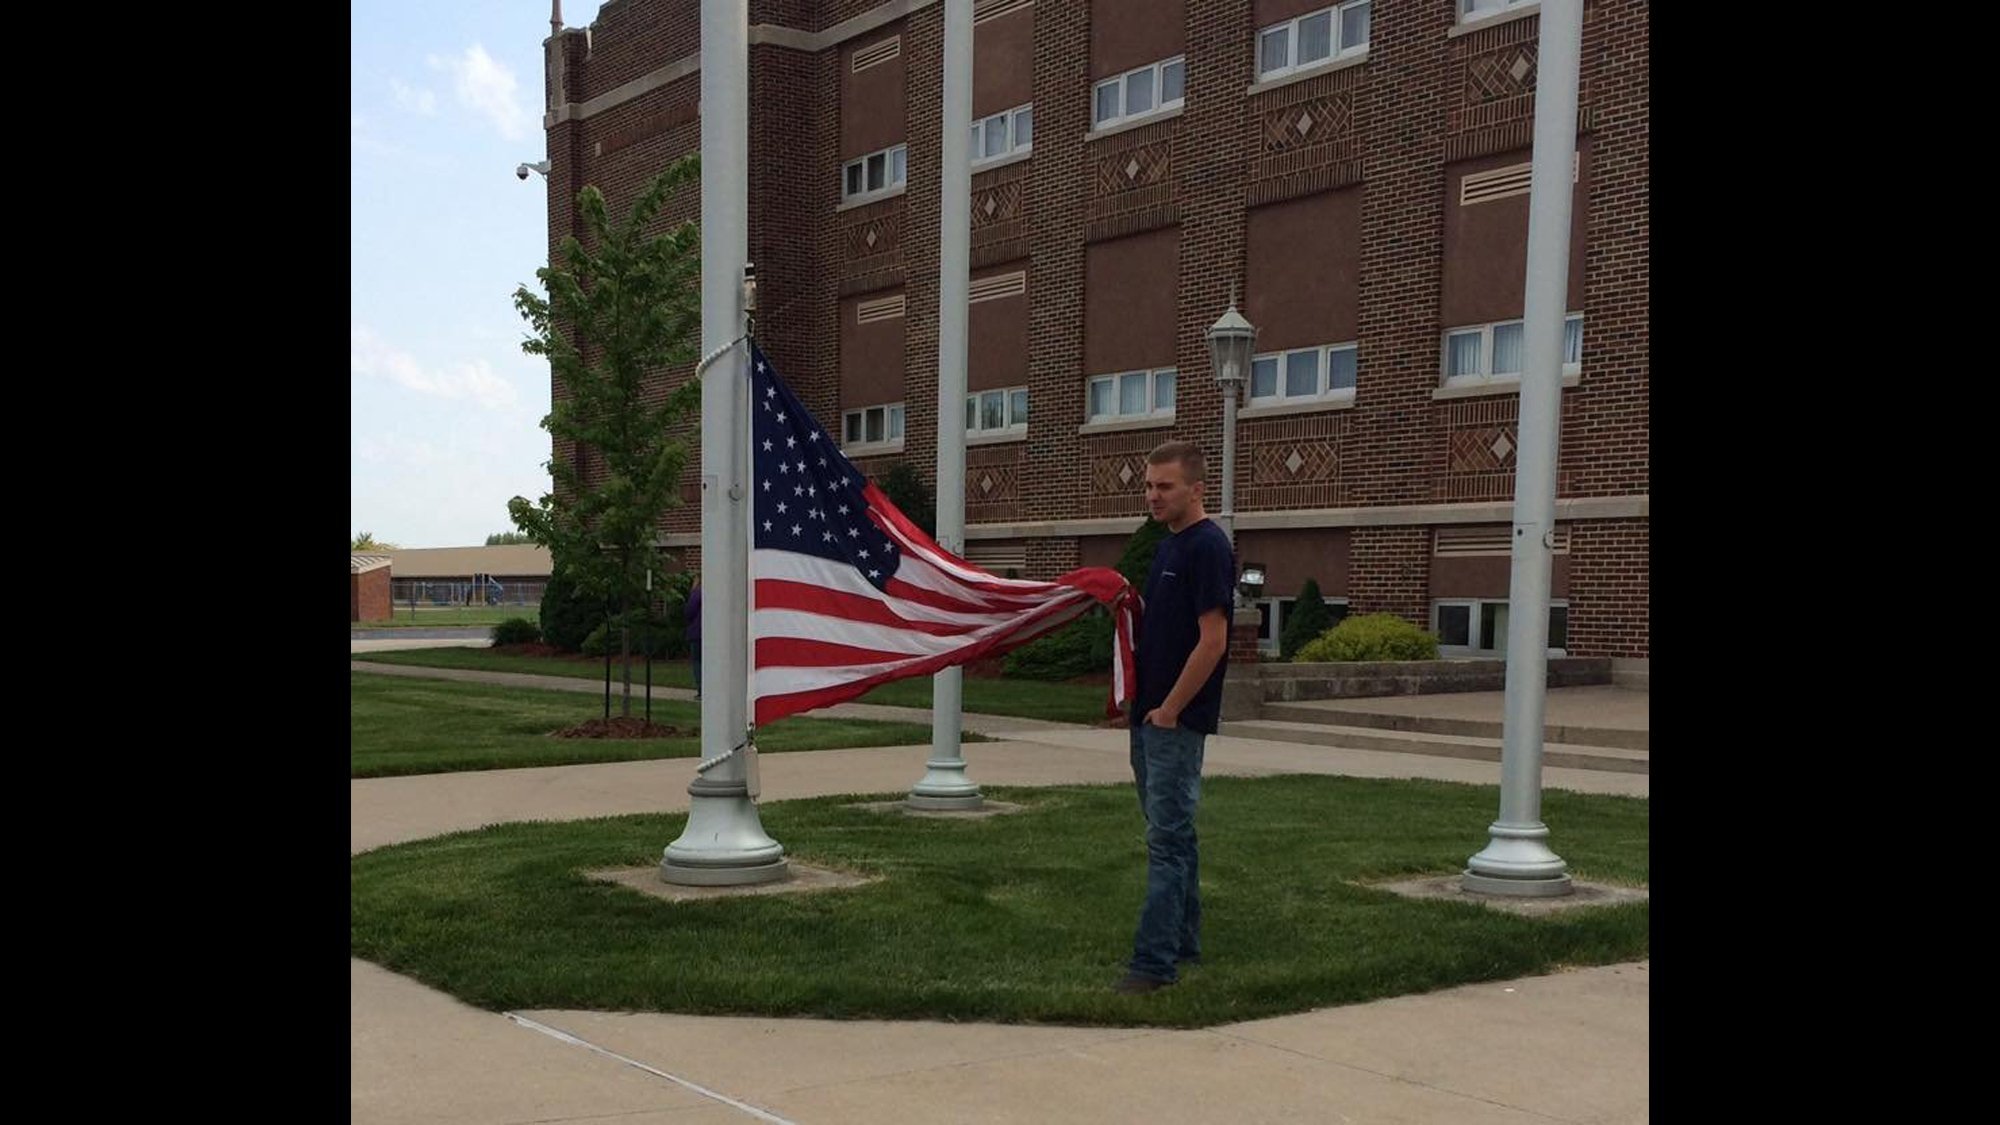 18-year-old Cole Dotson, a senior and the class president at Continental High School in Continental, Ohio was driving past his high school on Sunday when he noticed the American flag hovering dangerously close to the ground, so he stopped his car and held the flag, while calling his grandmother for assistance.

Photo Credit: Rhonda Ordway Pester/Facebook/CNNiReport